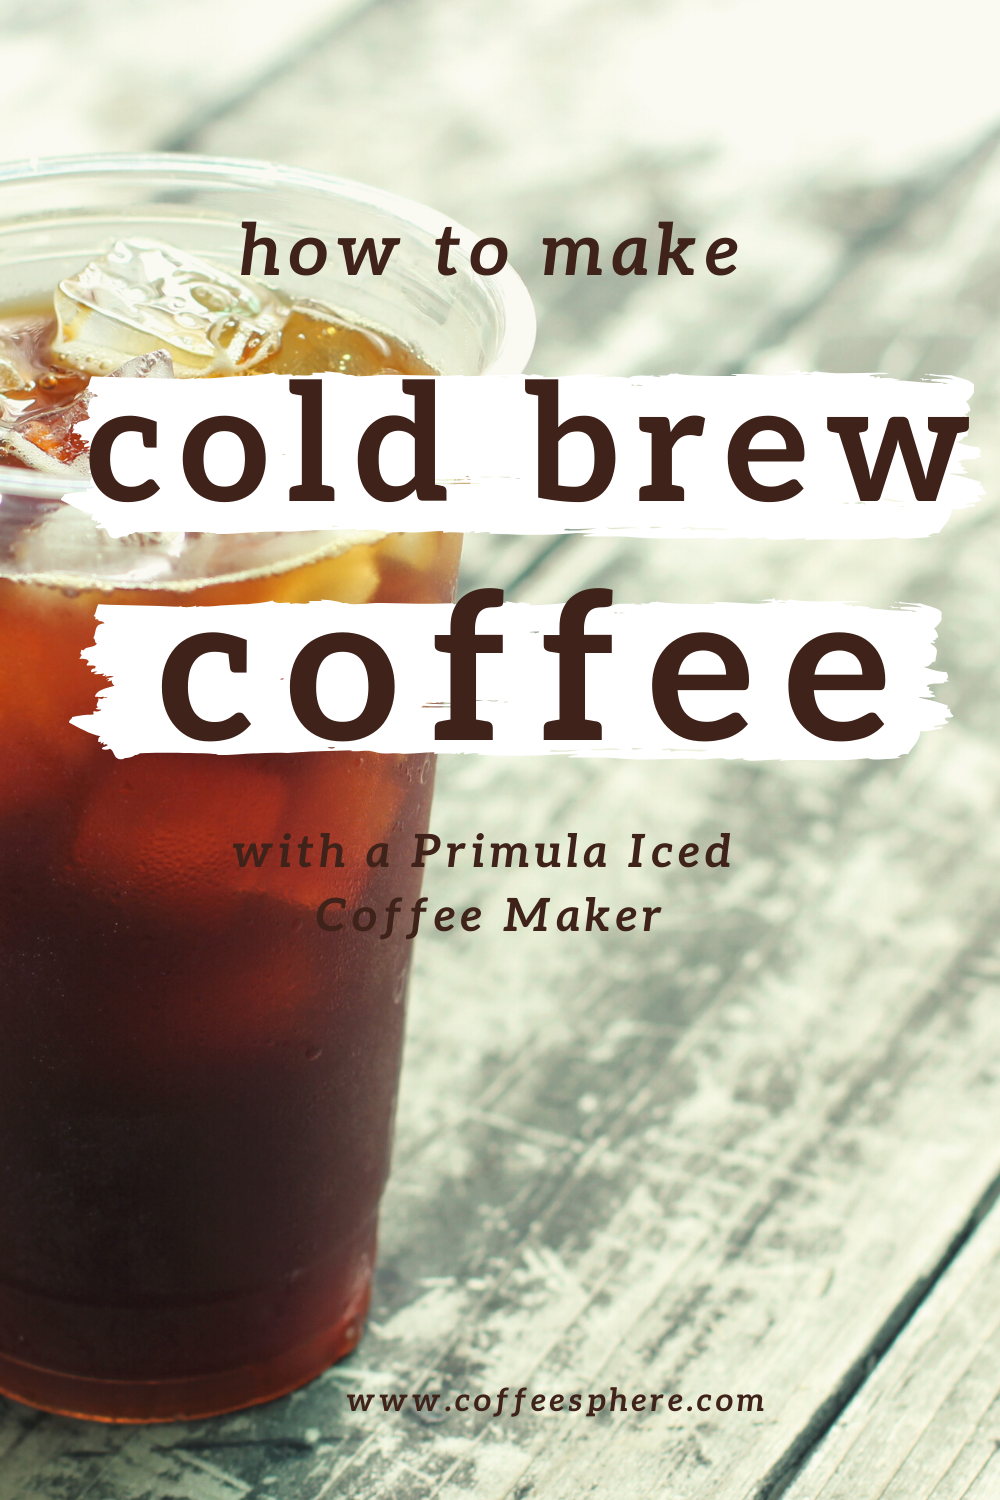 https://www.coffeesphere.com/wp-content/uploads/2016/06/Primula-Pace-Cold-Brew-Iced-Coffee-Maker.png